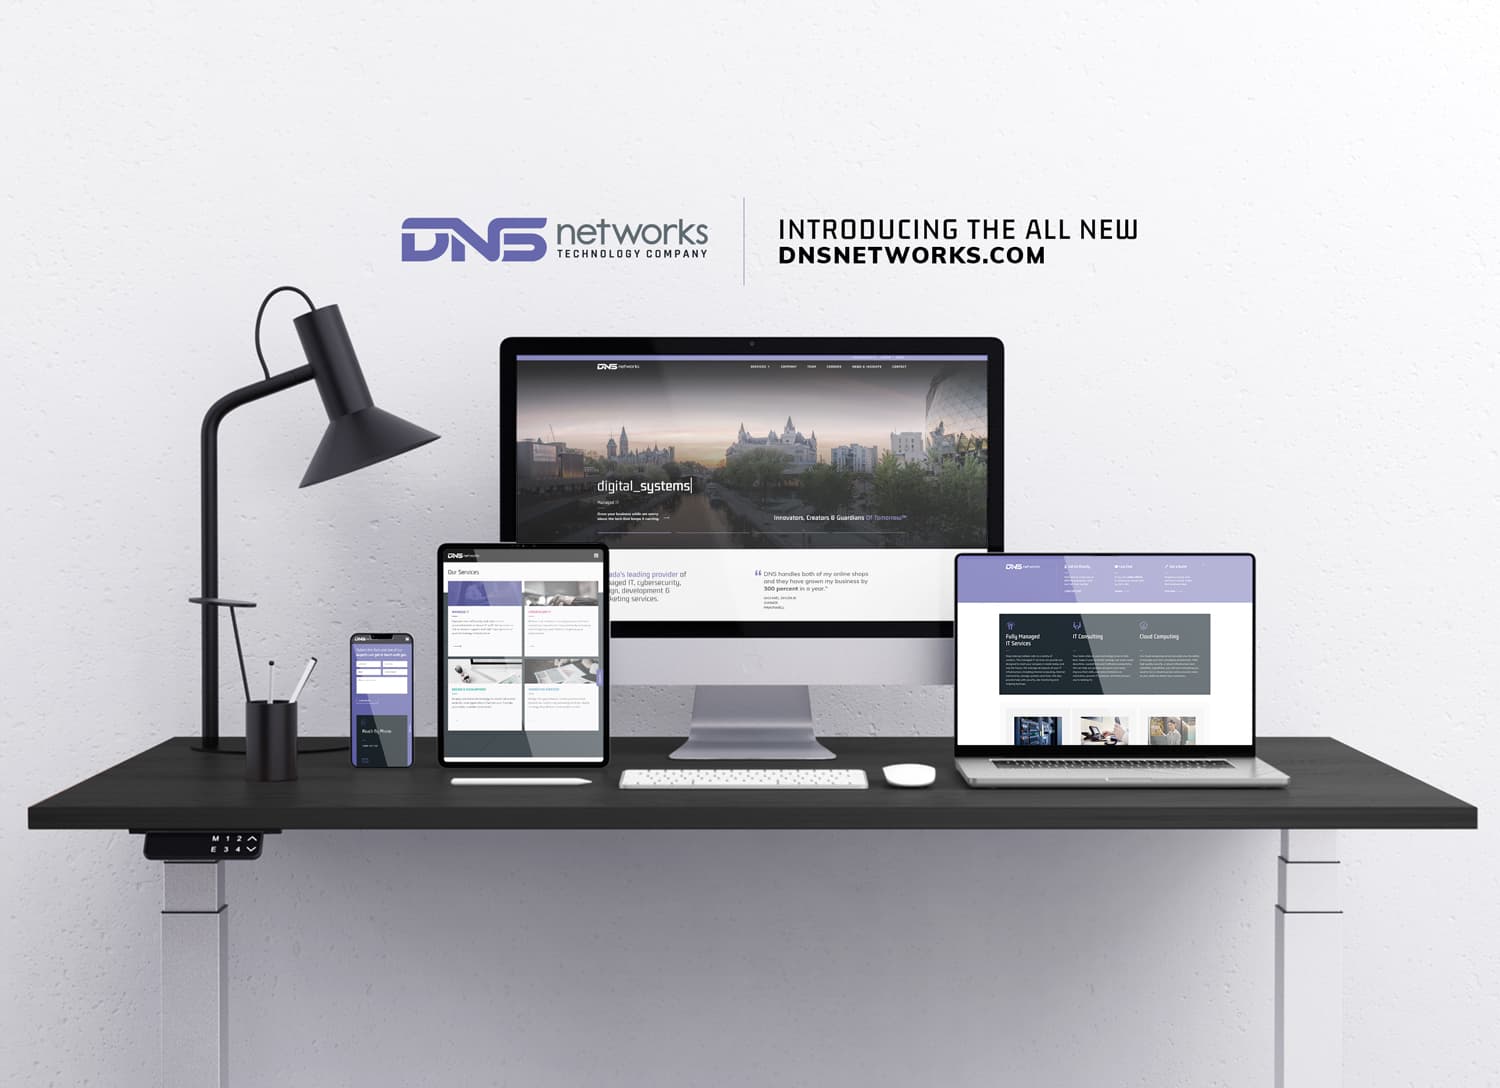 A visual look at the DNSnetworks website redesign.